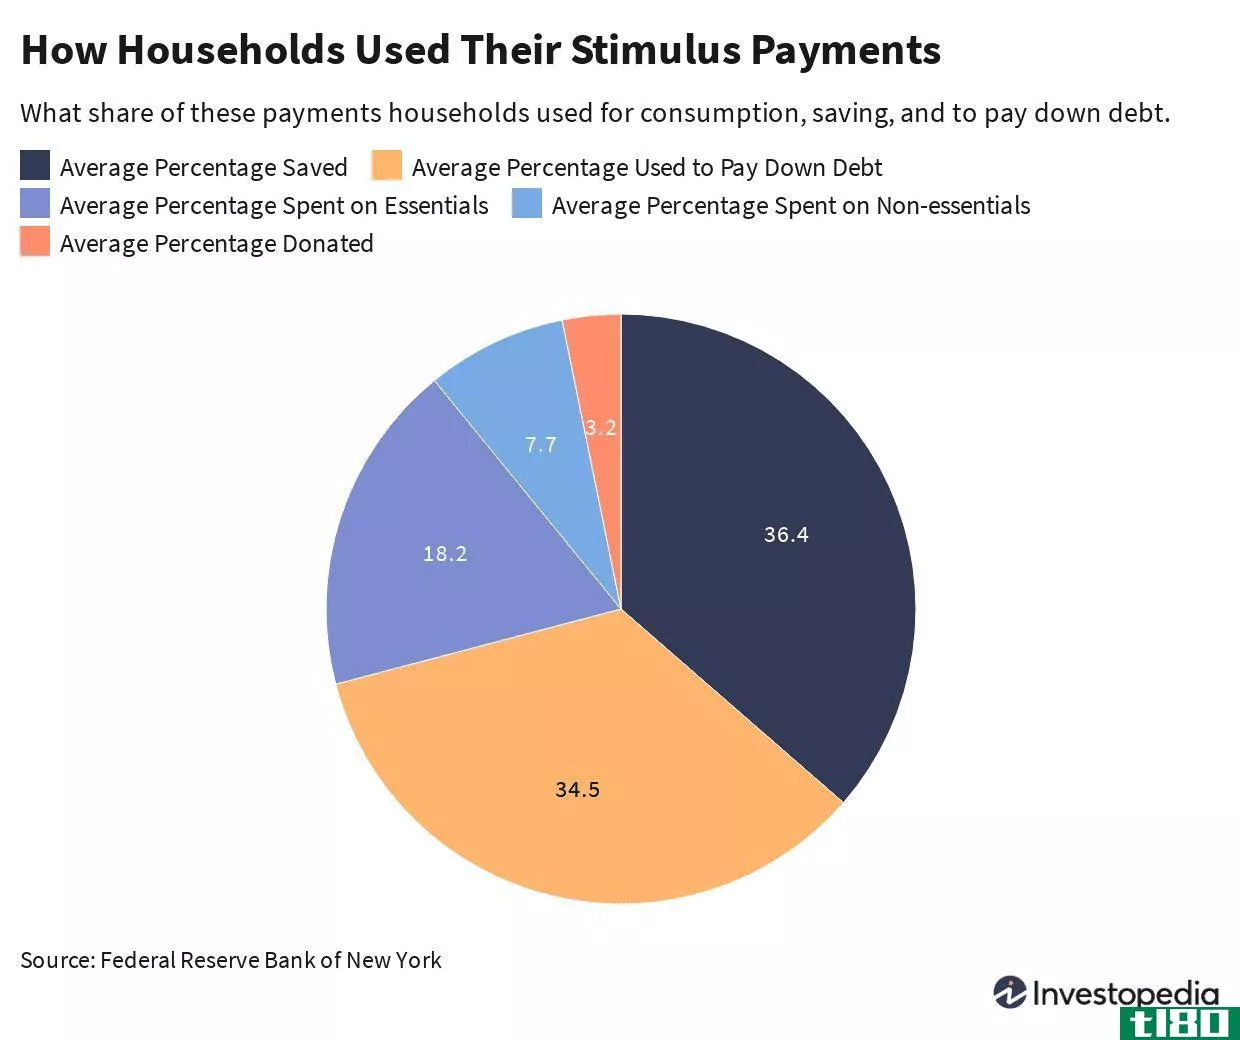 How households used their stimulus payments